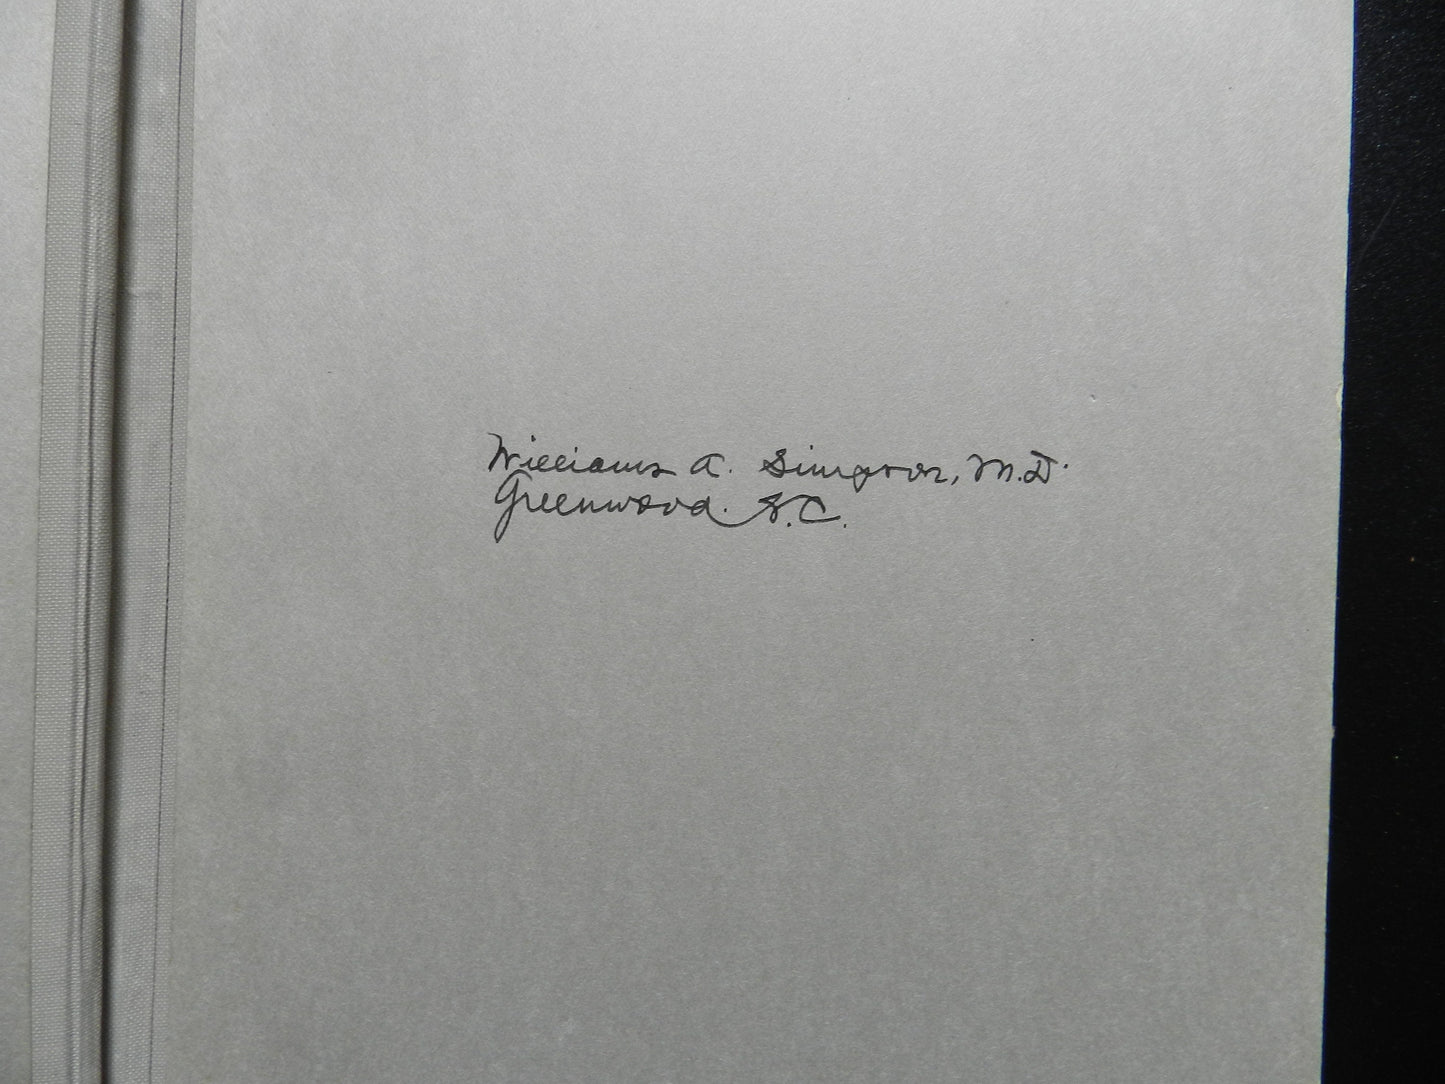 Antique Medical Book "International Abstract of Surgery" January to June, 1935